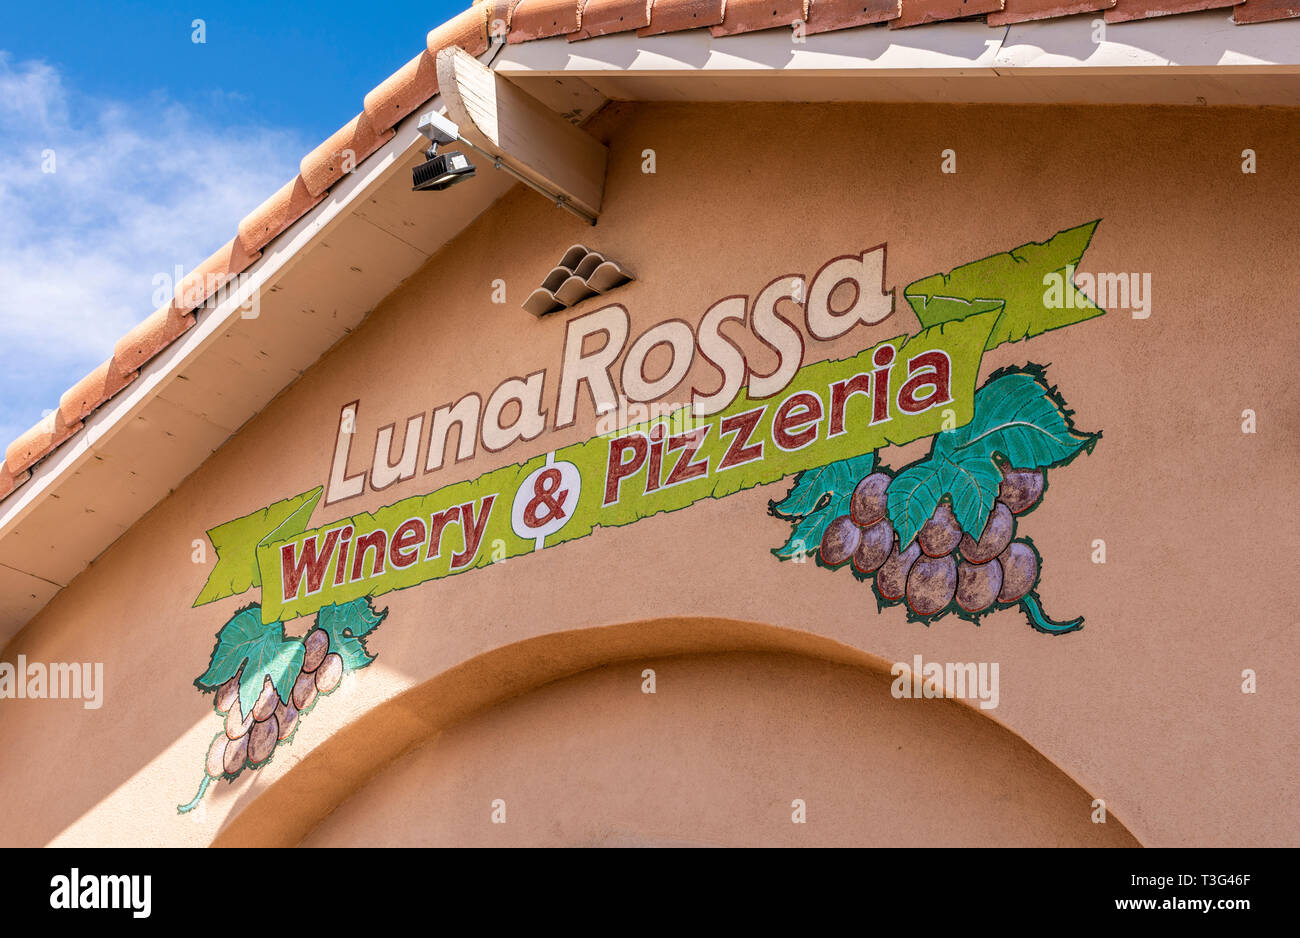 Luna Rossa Winery and Pizzeria in Las Cruces, New Mexico Stock Photo